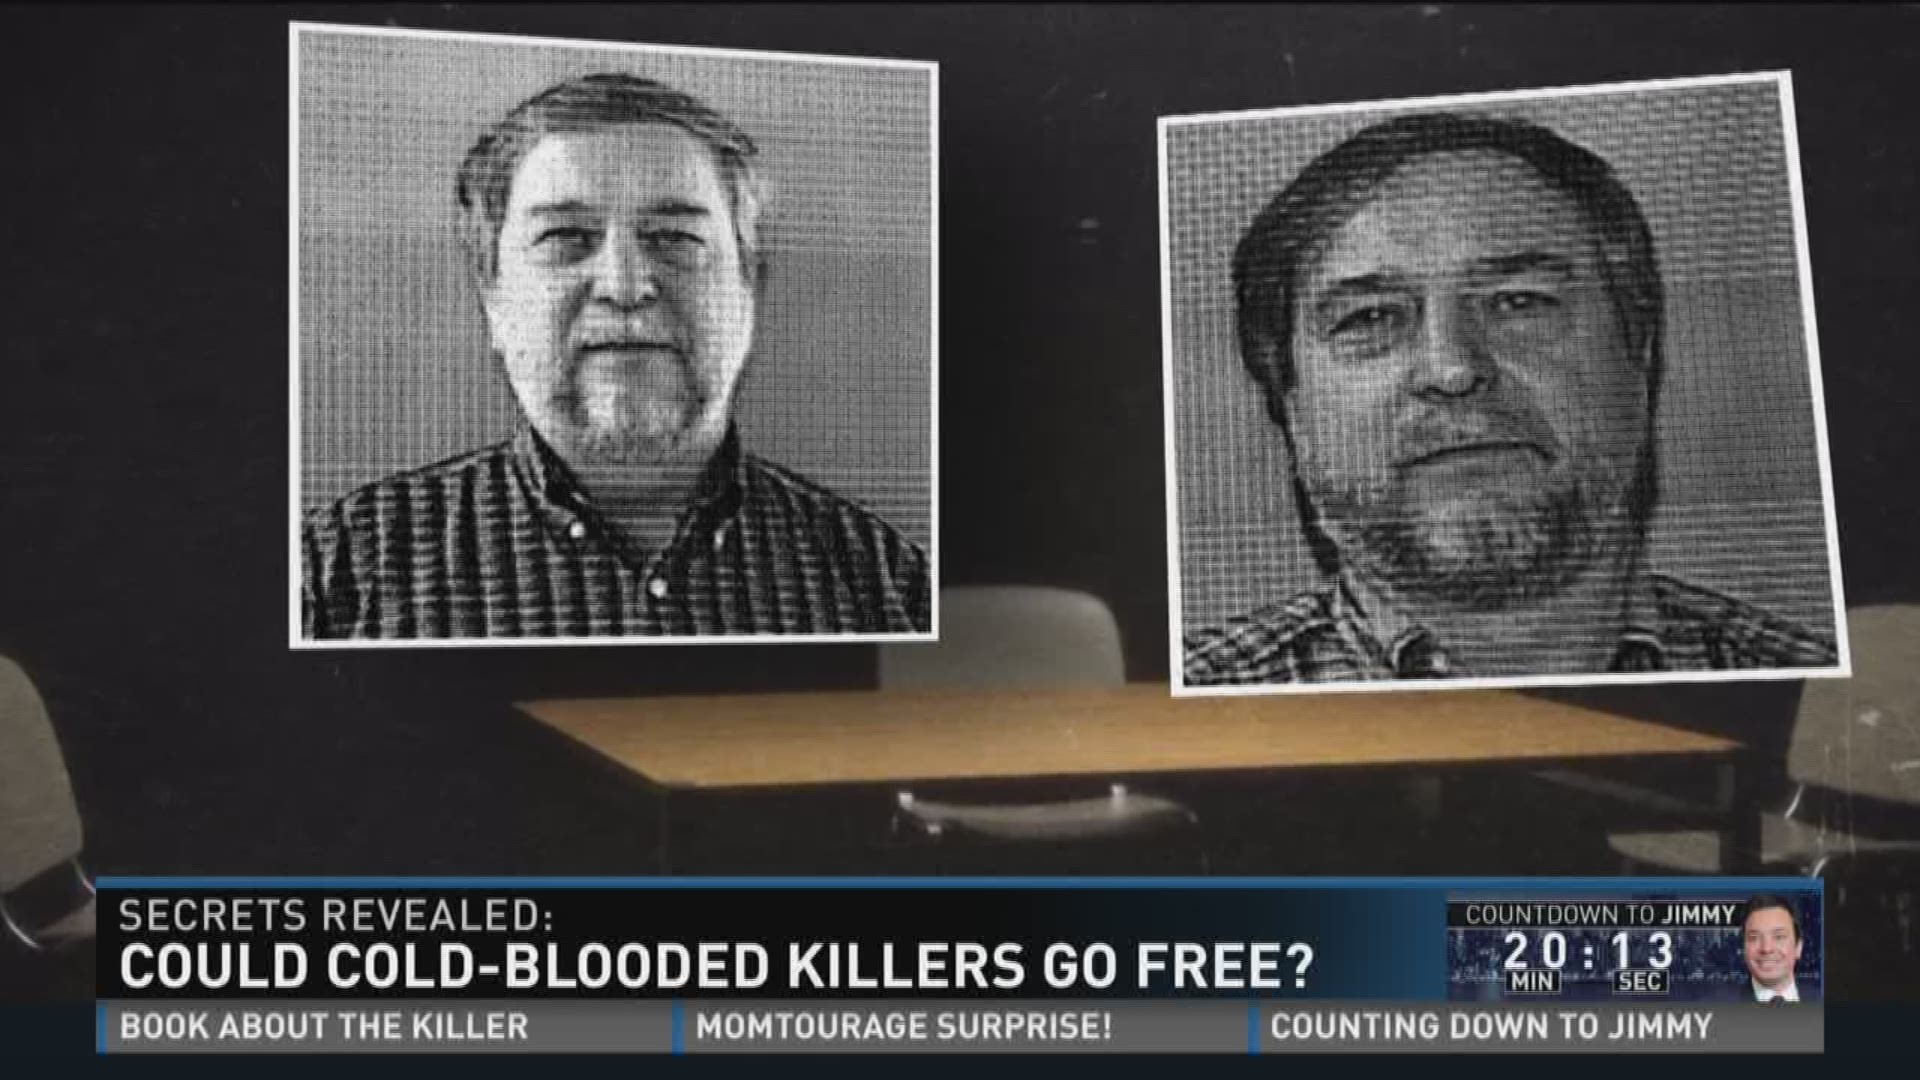 Could cold-blooded killers go free?